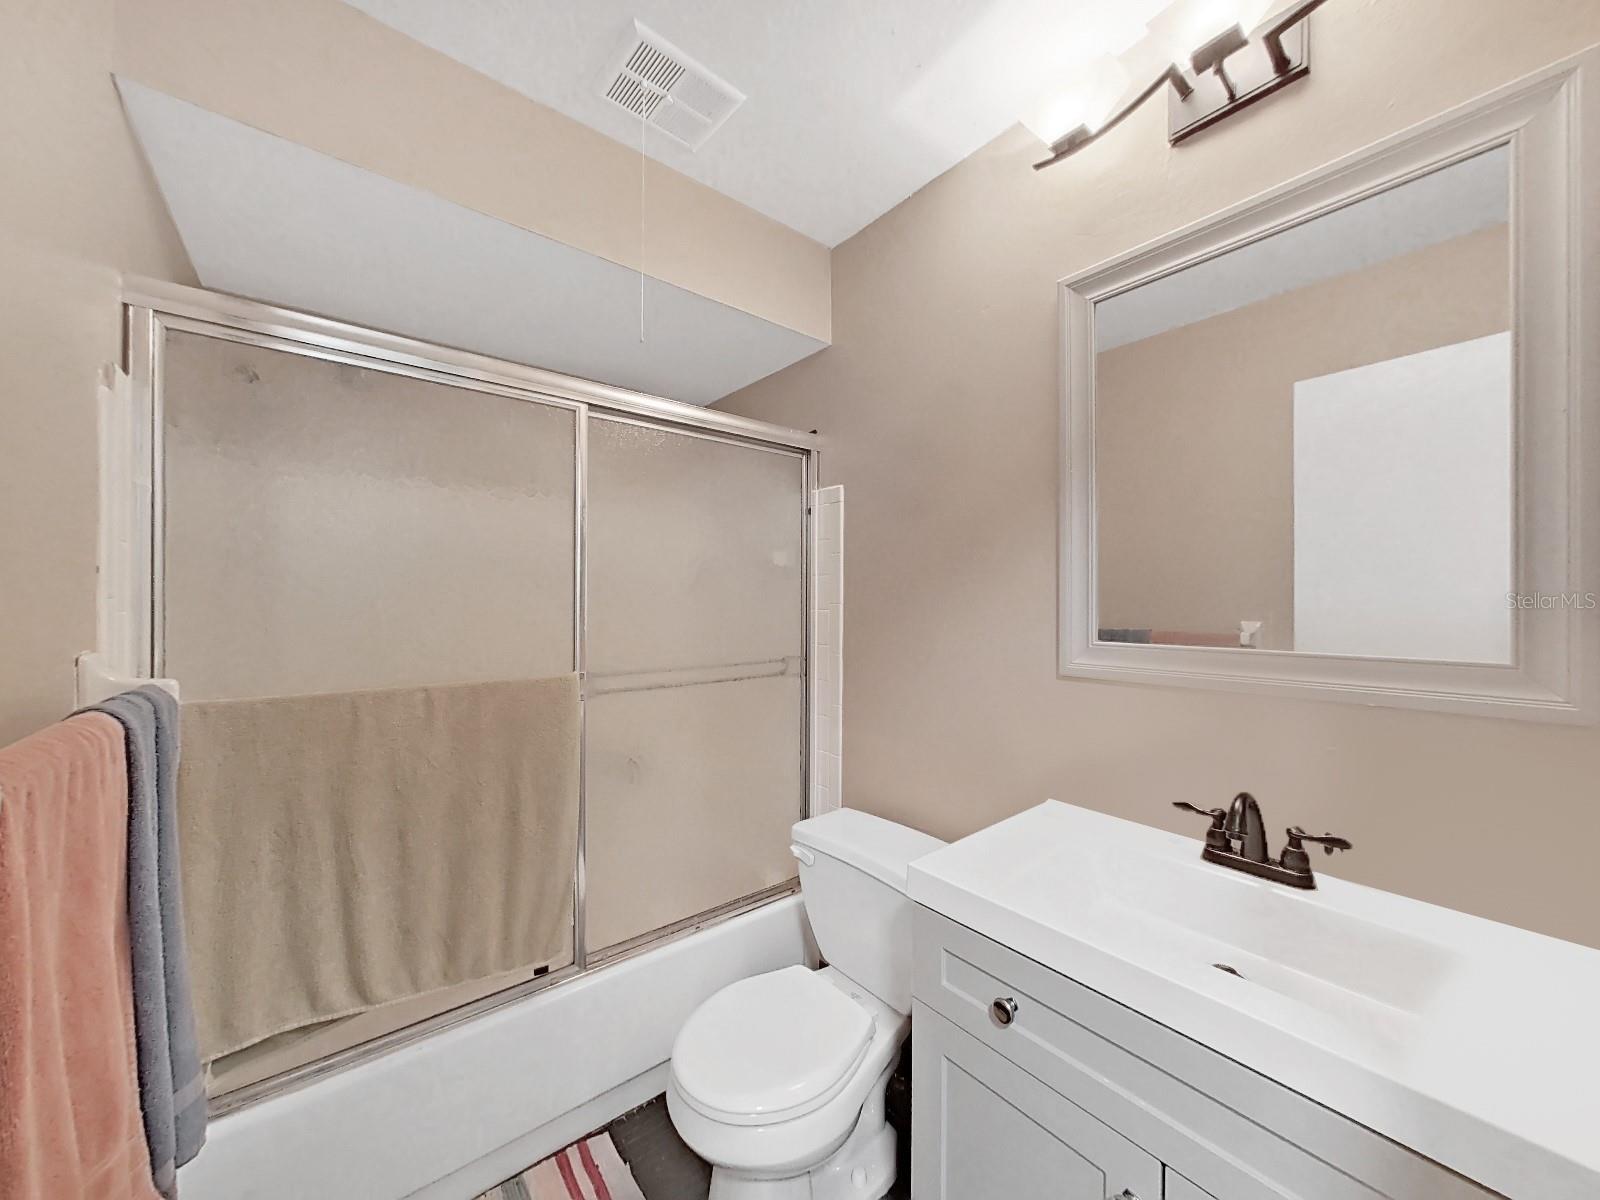 Main bath is conveniently located in the hallway!